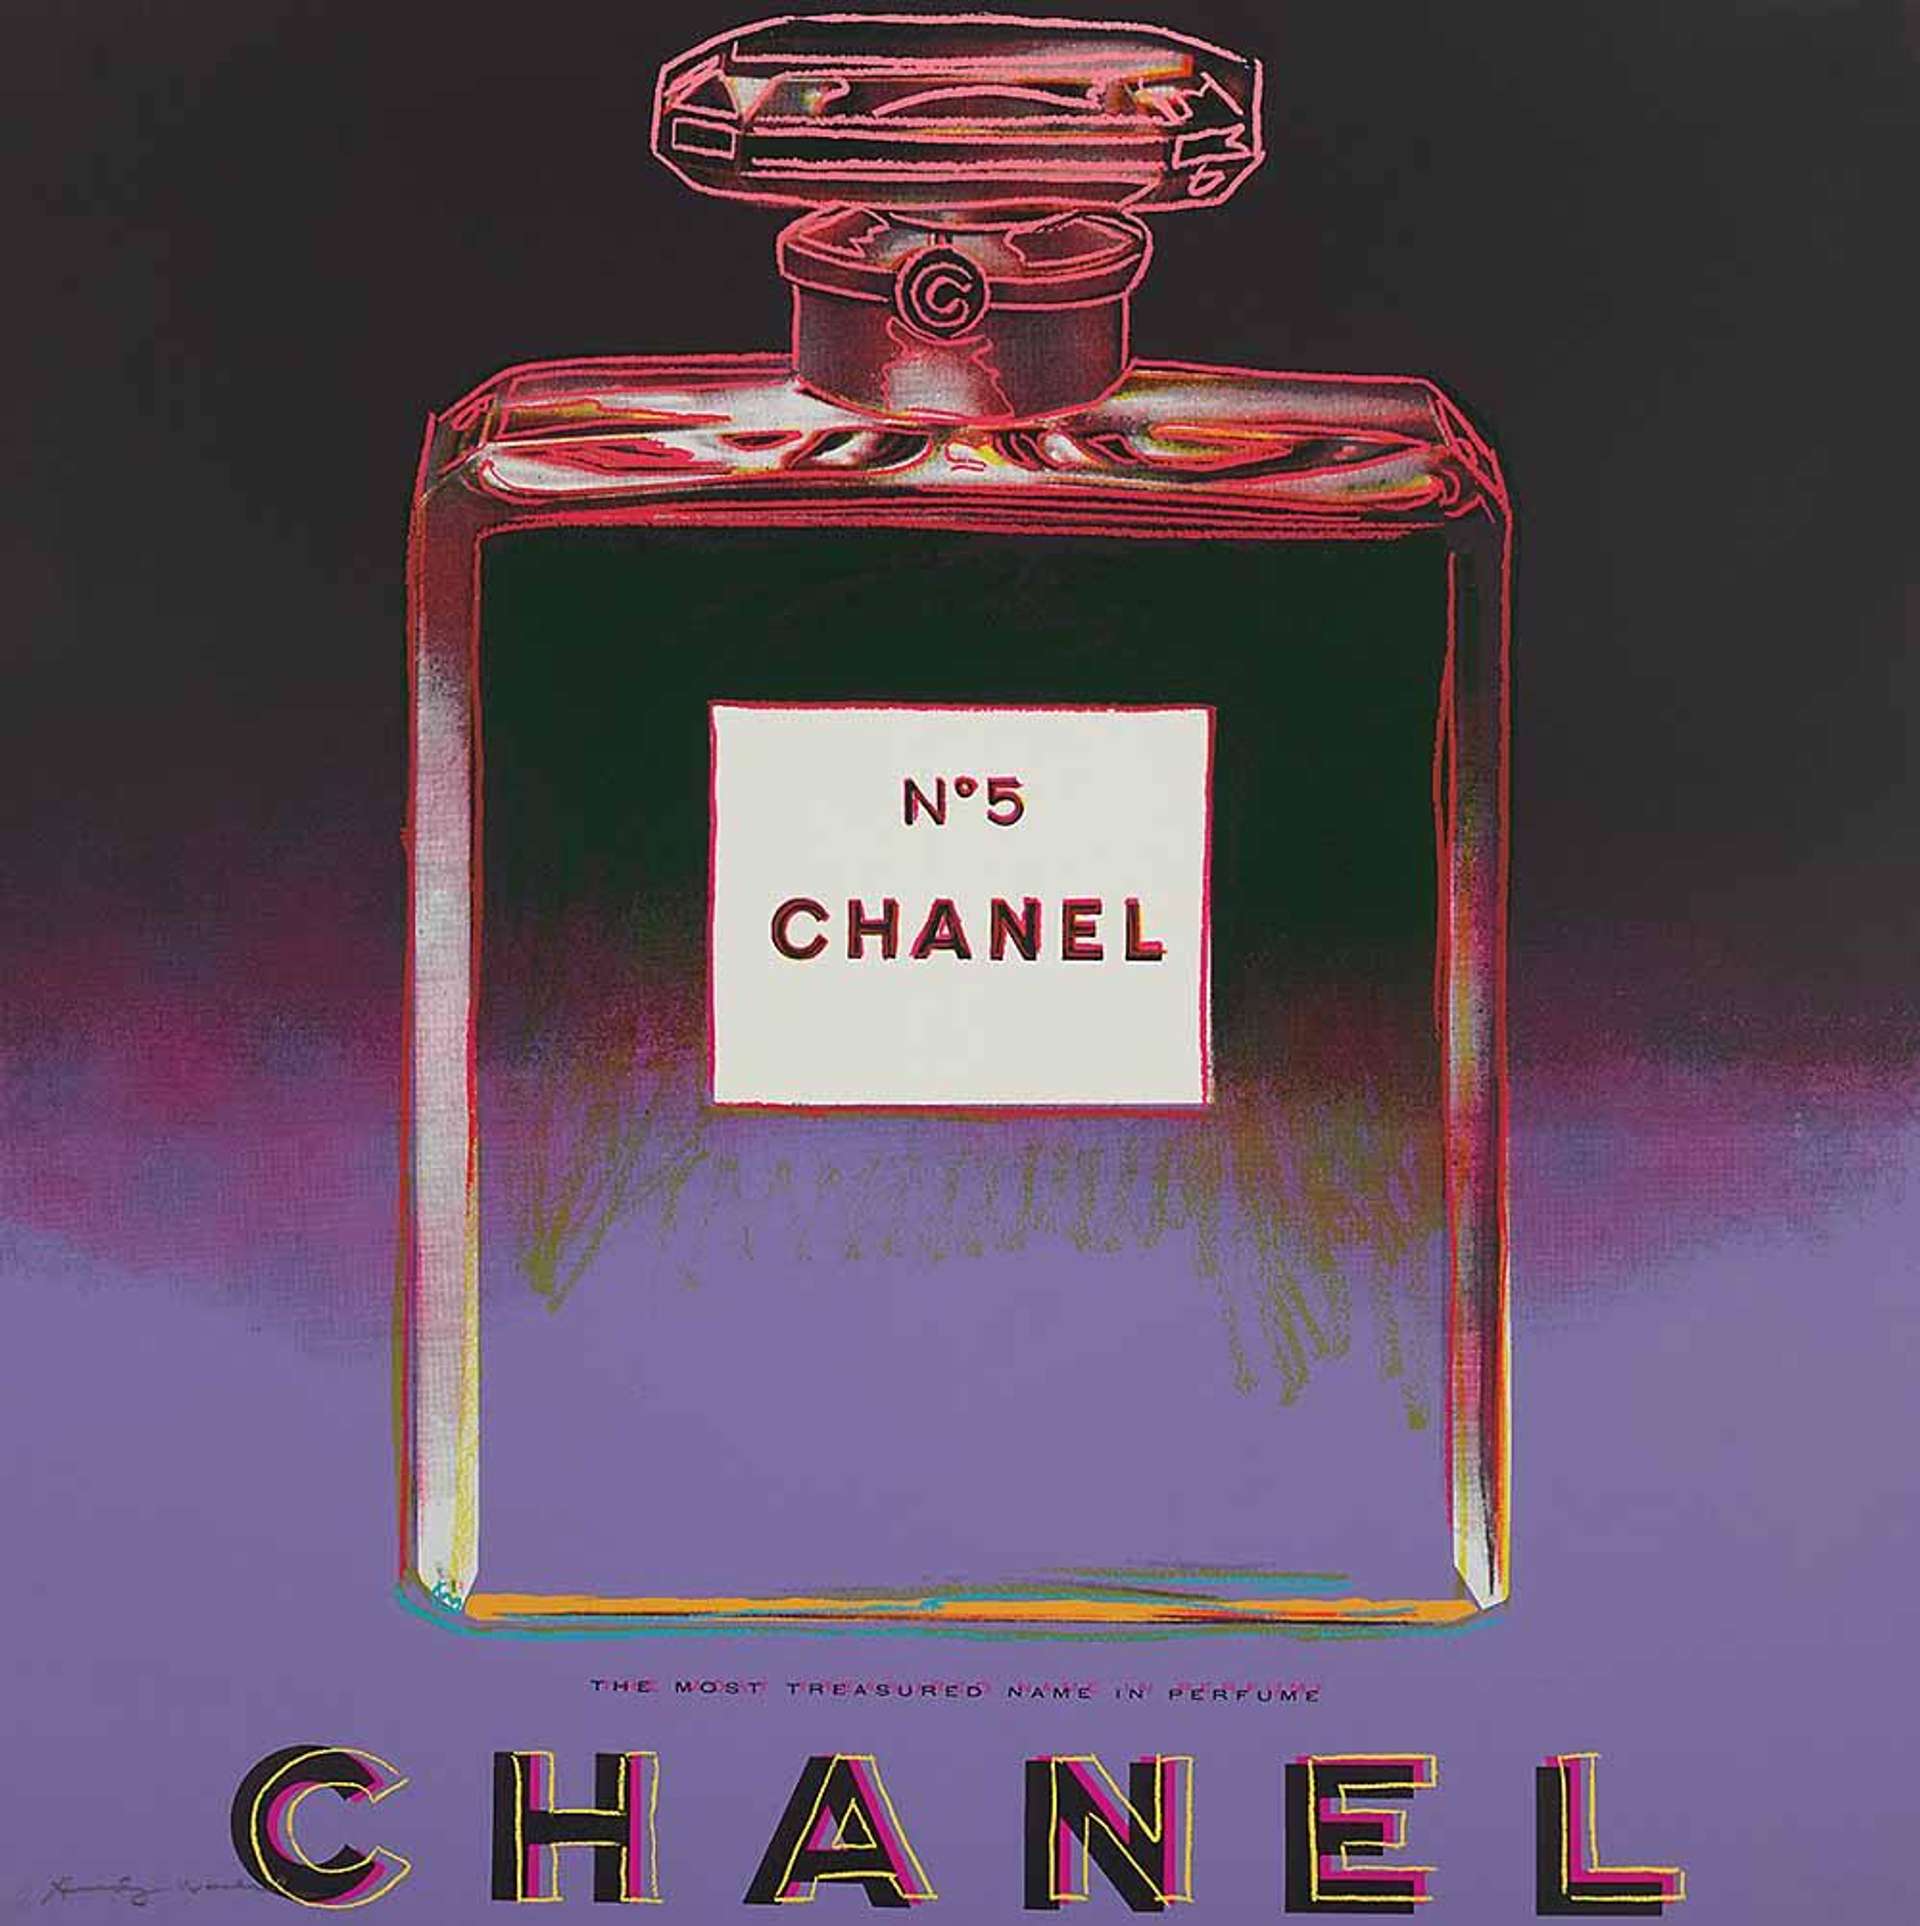 Chanel (F. & S. II.354) by Andy Warhol